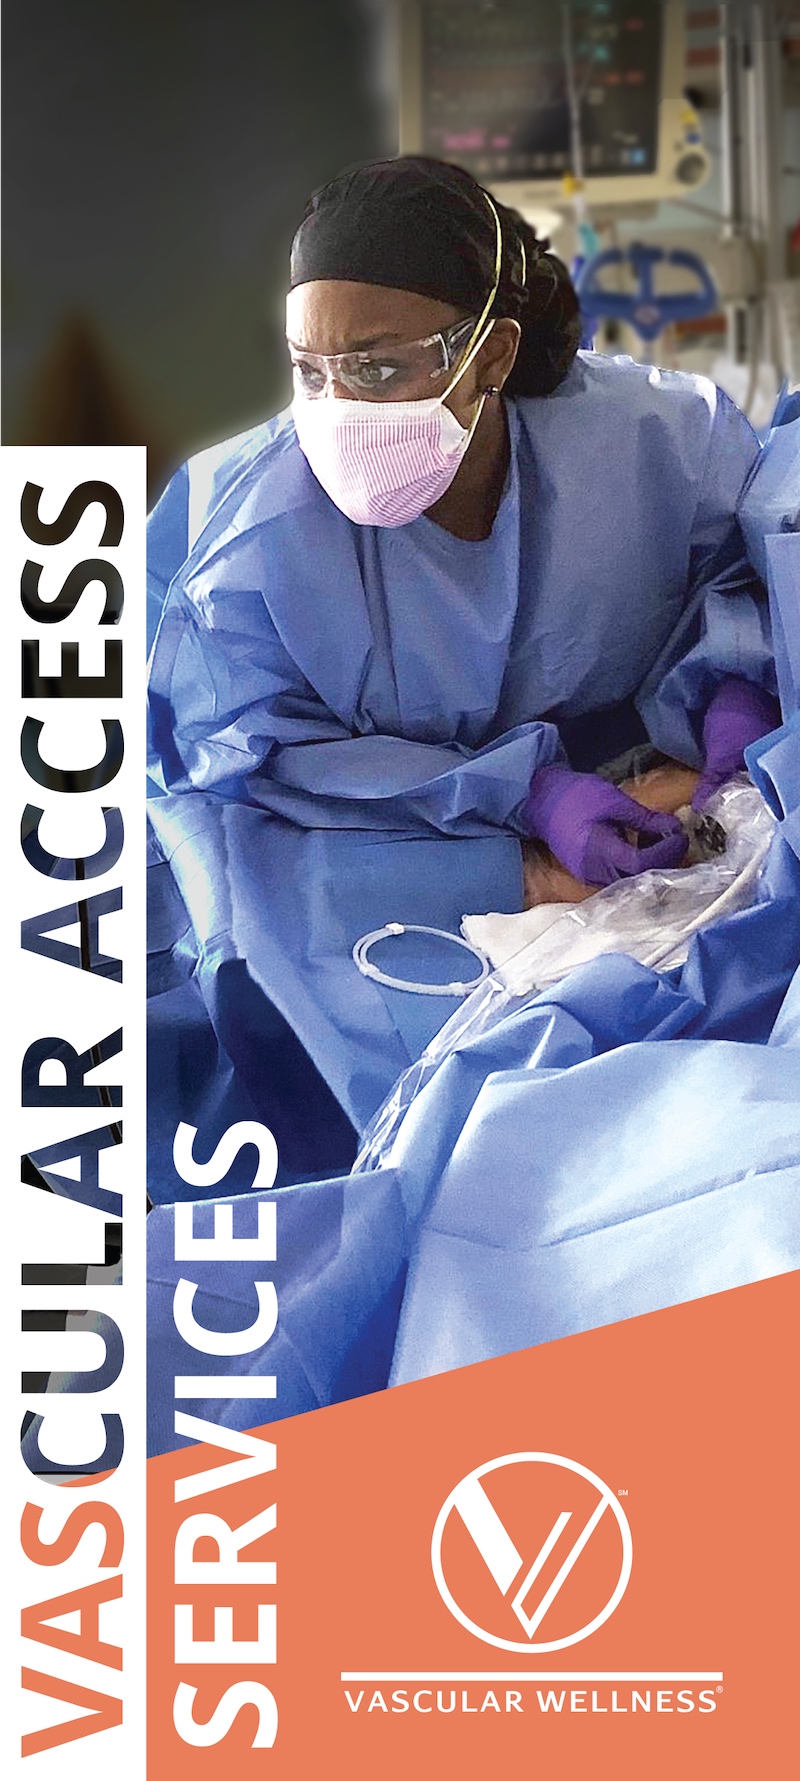 Vascular Access Team, Specialists in Vascular Access Care